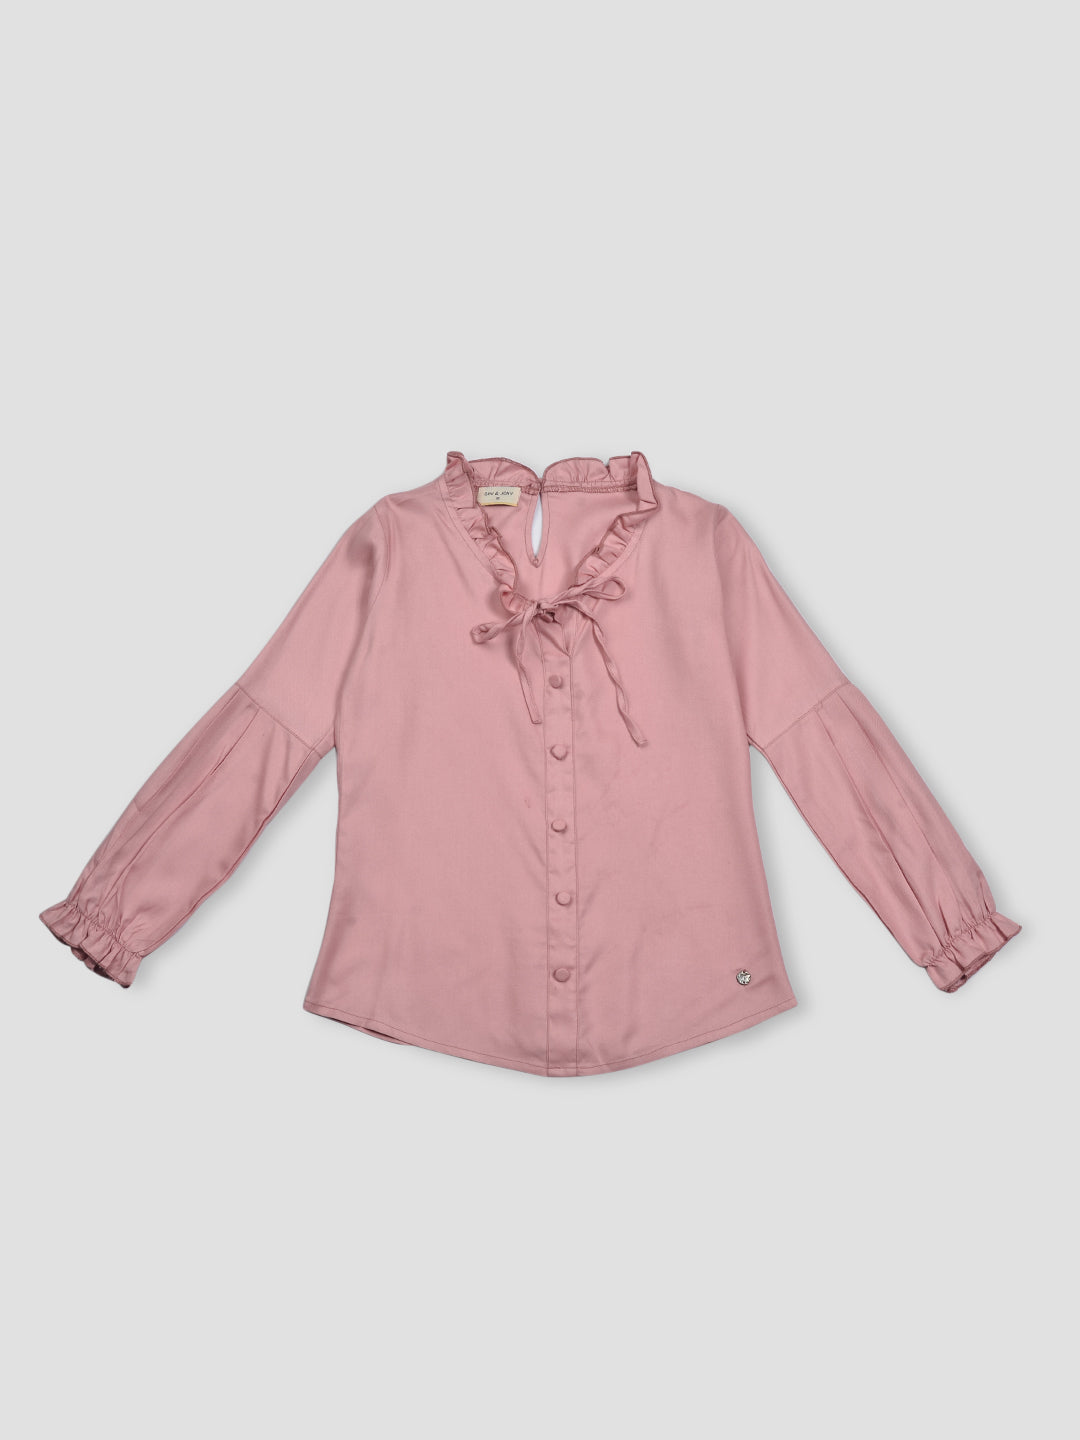 Girls Pink Woven Solid Full Sleeves Woven Top